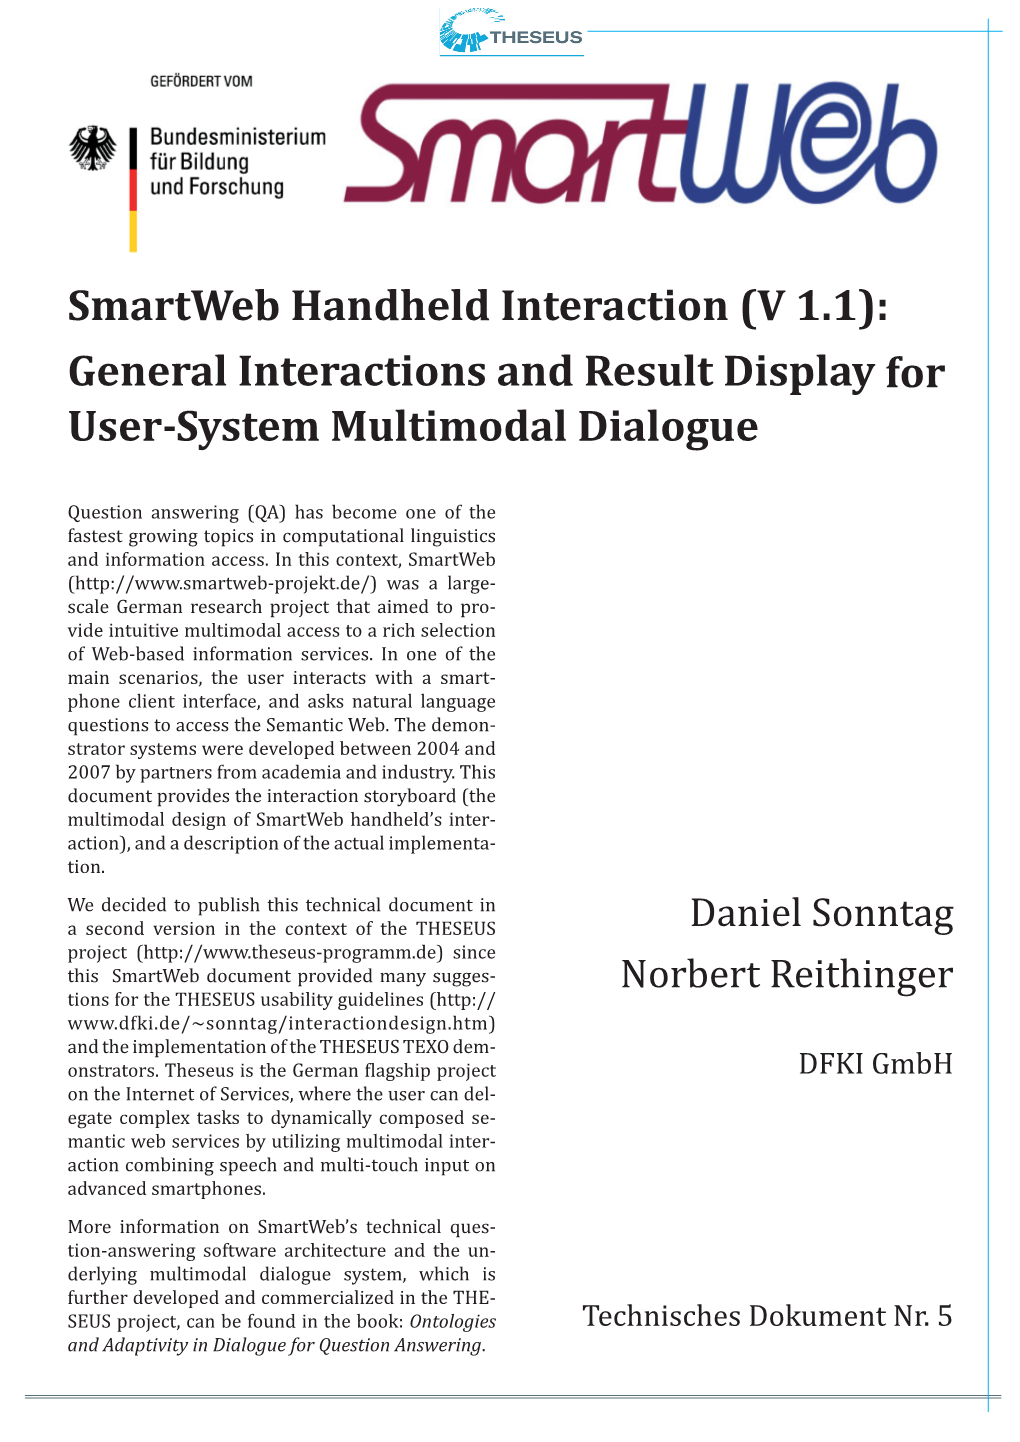 Smartweb Handheld Interaction (V 1.1): General Interactions and Result Display for User-System Multimodal Dialogue